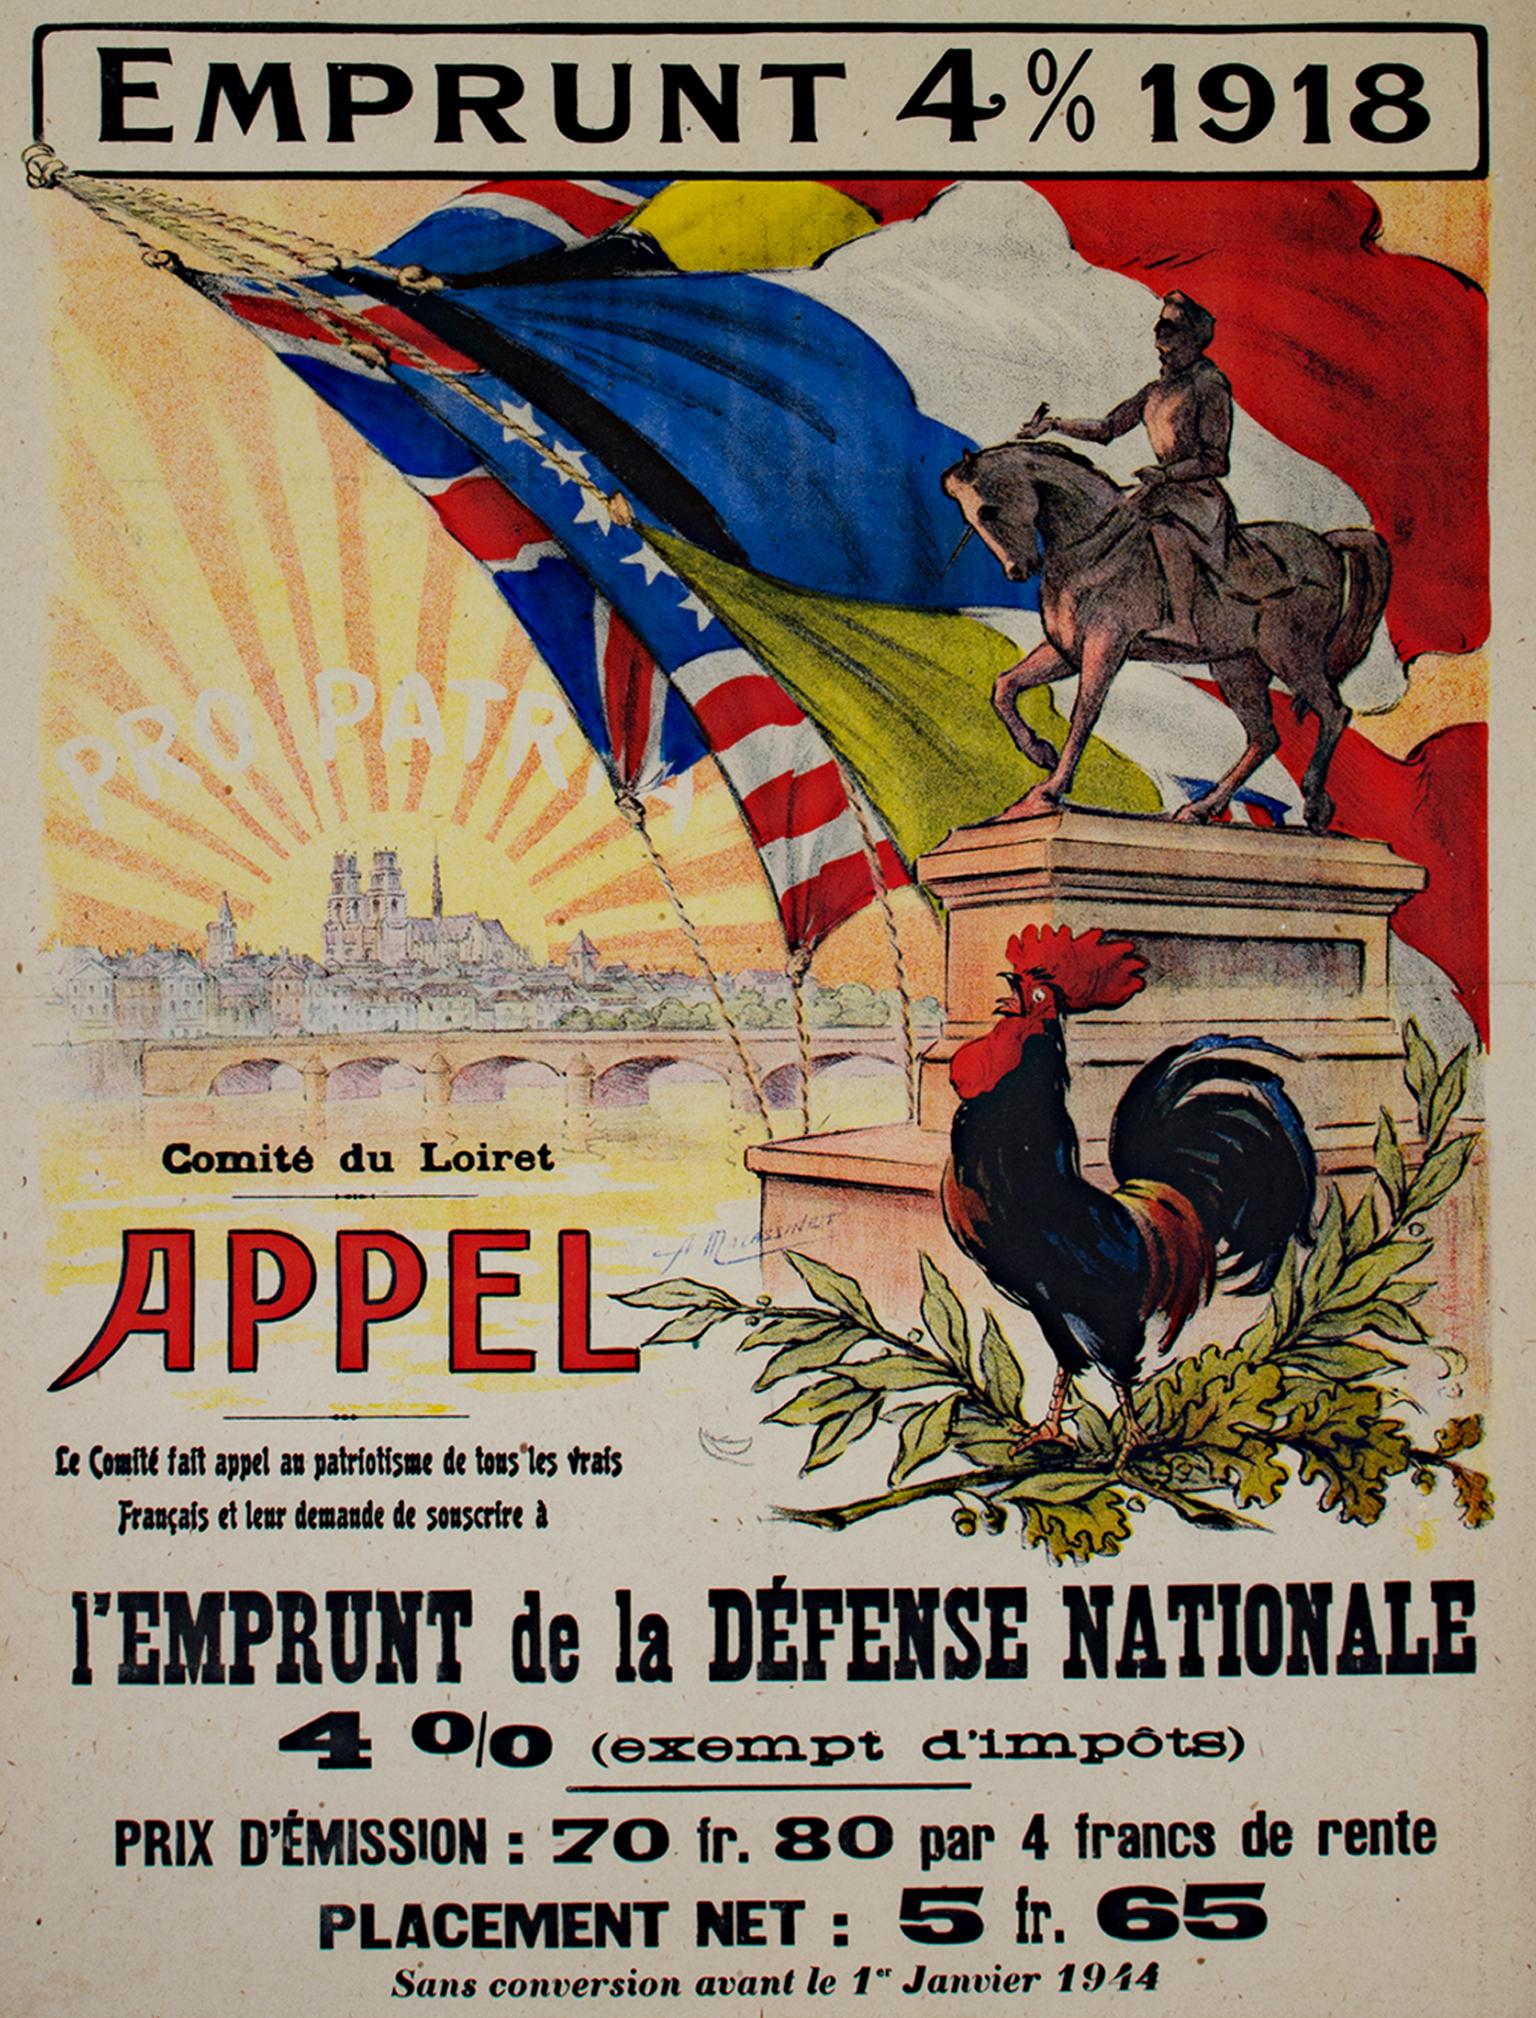 "Emprunt 4% 1918 - Appel" is an original lithograph poster by A. Malassinet. This poster advertised a fund for the national defense during World War I. The following are two statements from facilities that have this poster in their archives,